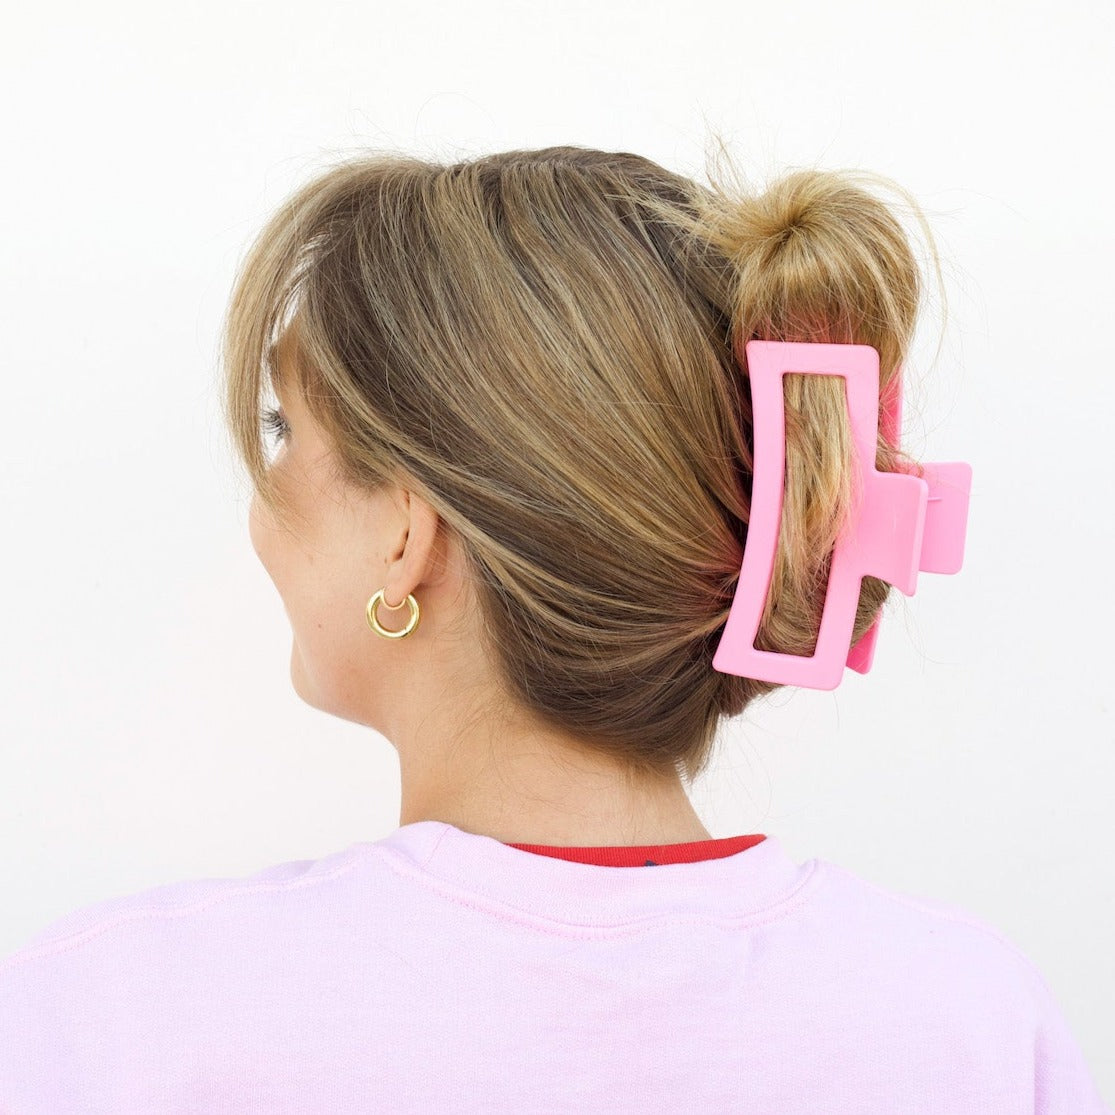 A girl with blonde hair in an updo wearing an XL matte baby pink claw clip against a white background.